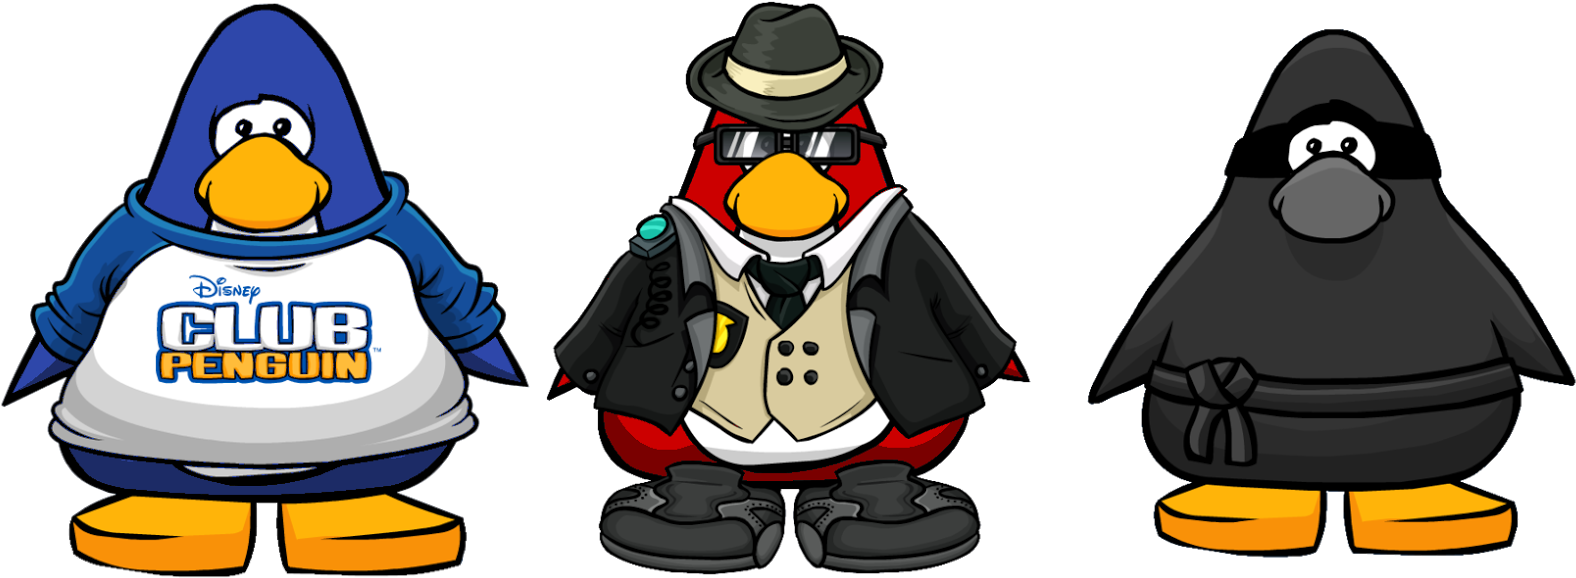 The Characters Would Be - Club Penguin (1600x583)